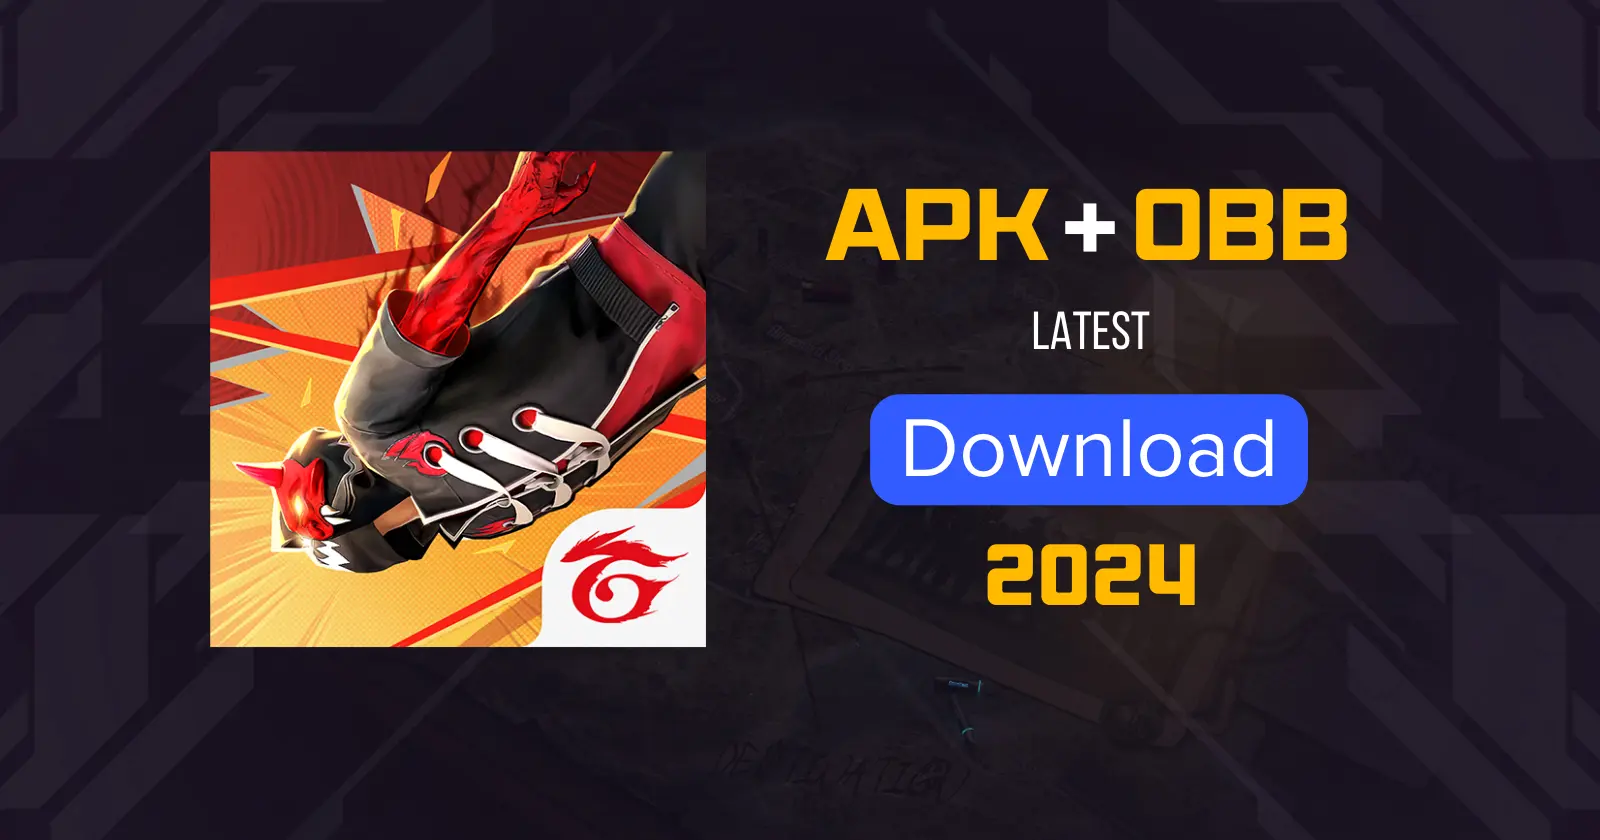 Free Fire game latest version Icon with apk, obb and download button text